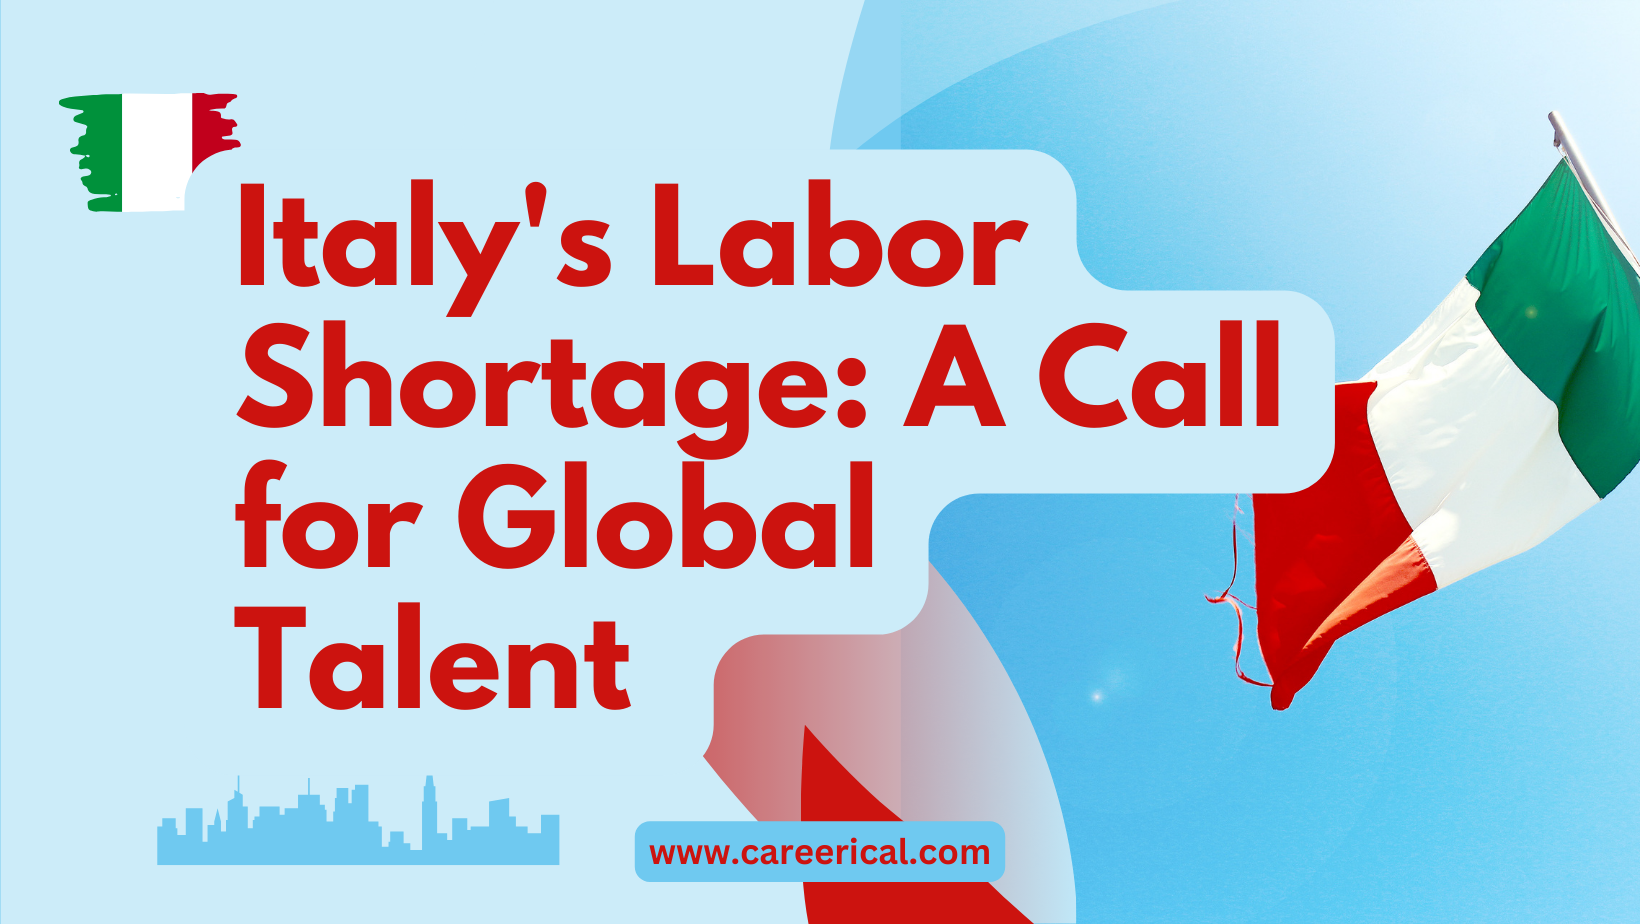 Italy's Labor Shortage A Call for Global Talent